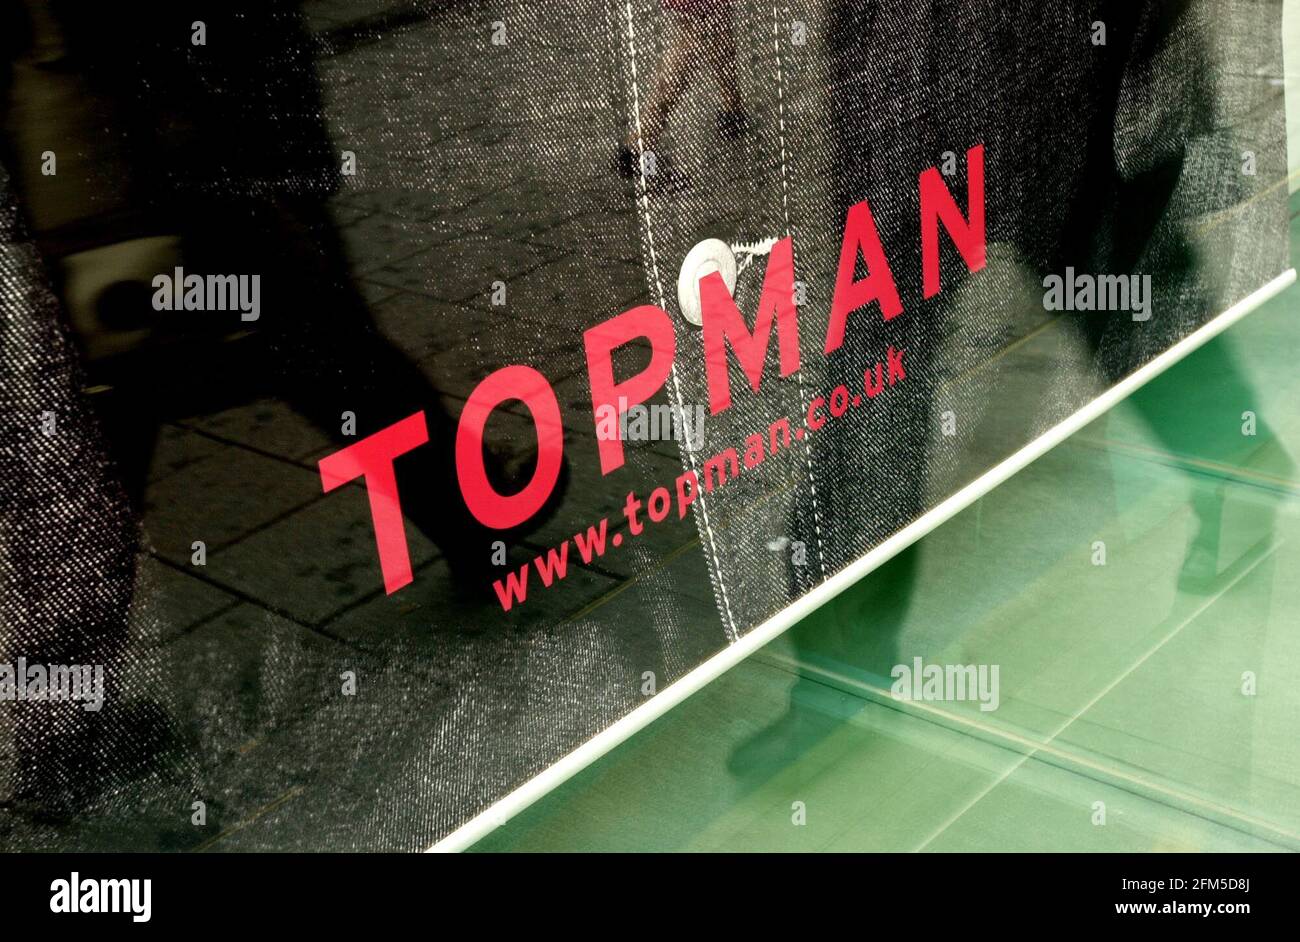 Top Man - Fashion Retail Store in Oxford Street, London.  July 2001and Web Site: www.topman.co.uk Stock Photo